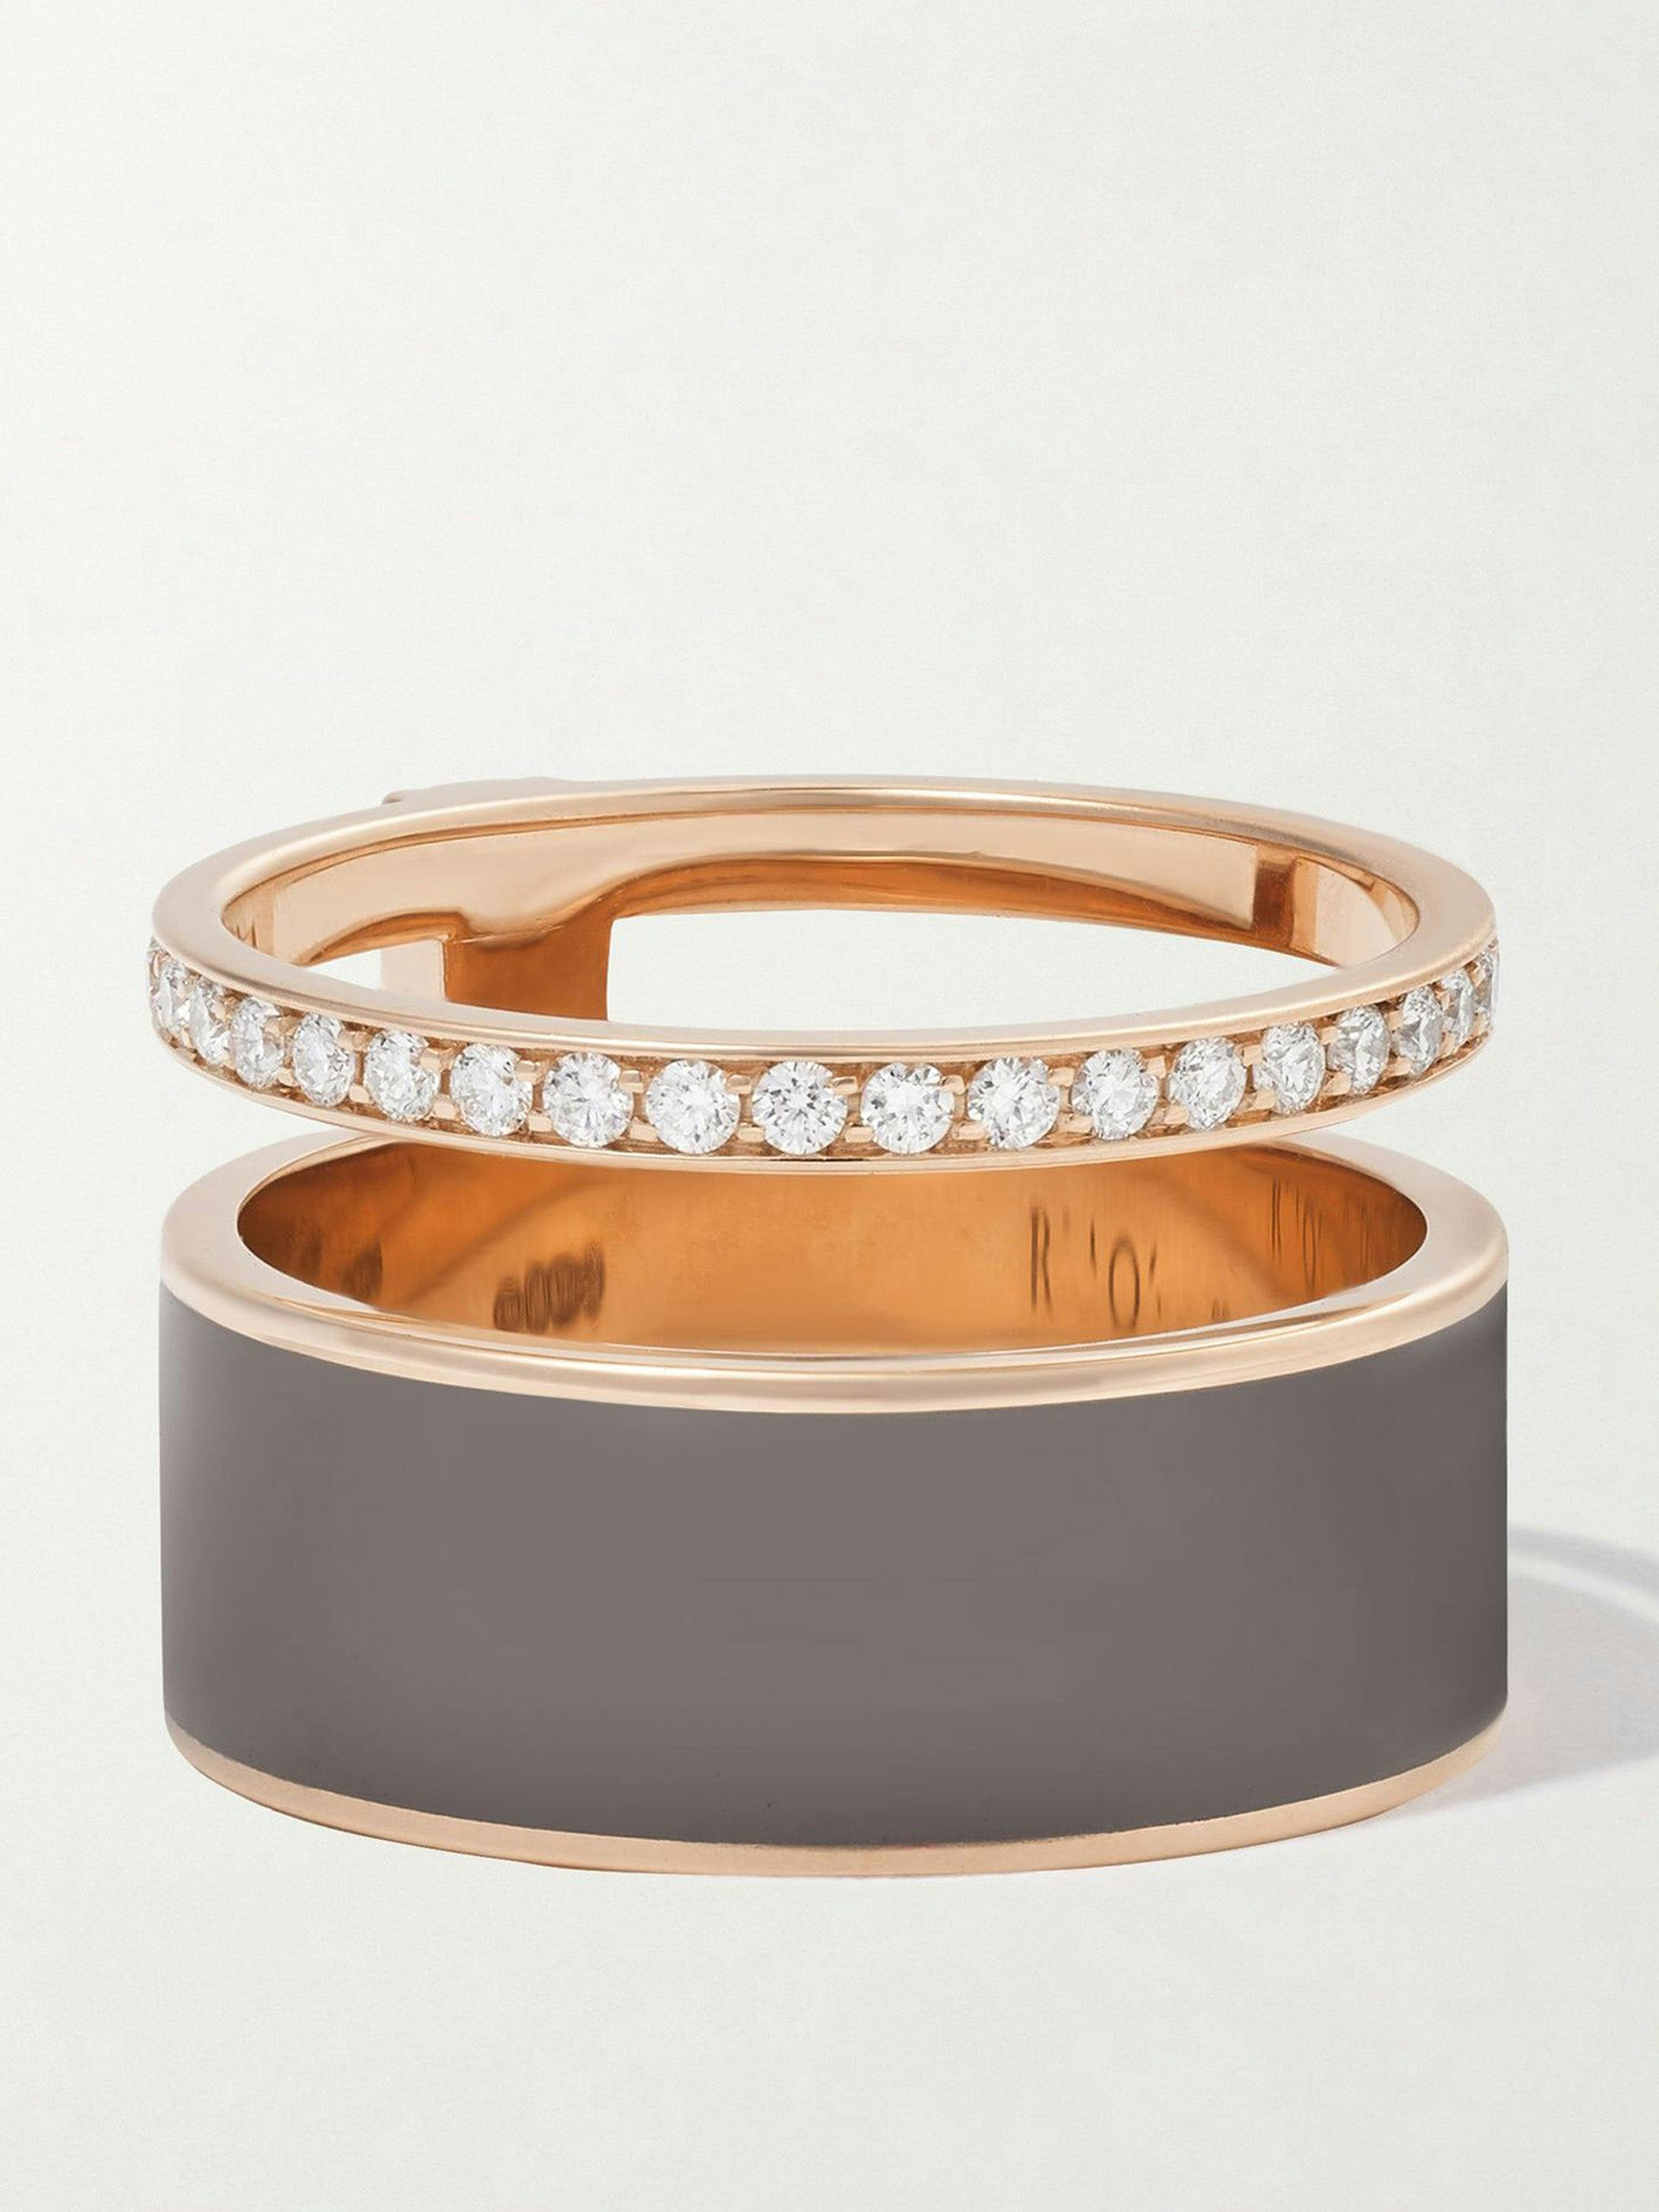 Berbere 18kt rose gold, lacquer and diamond ring